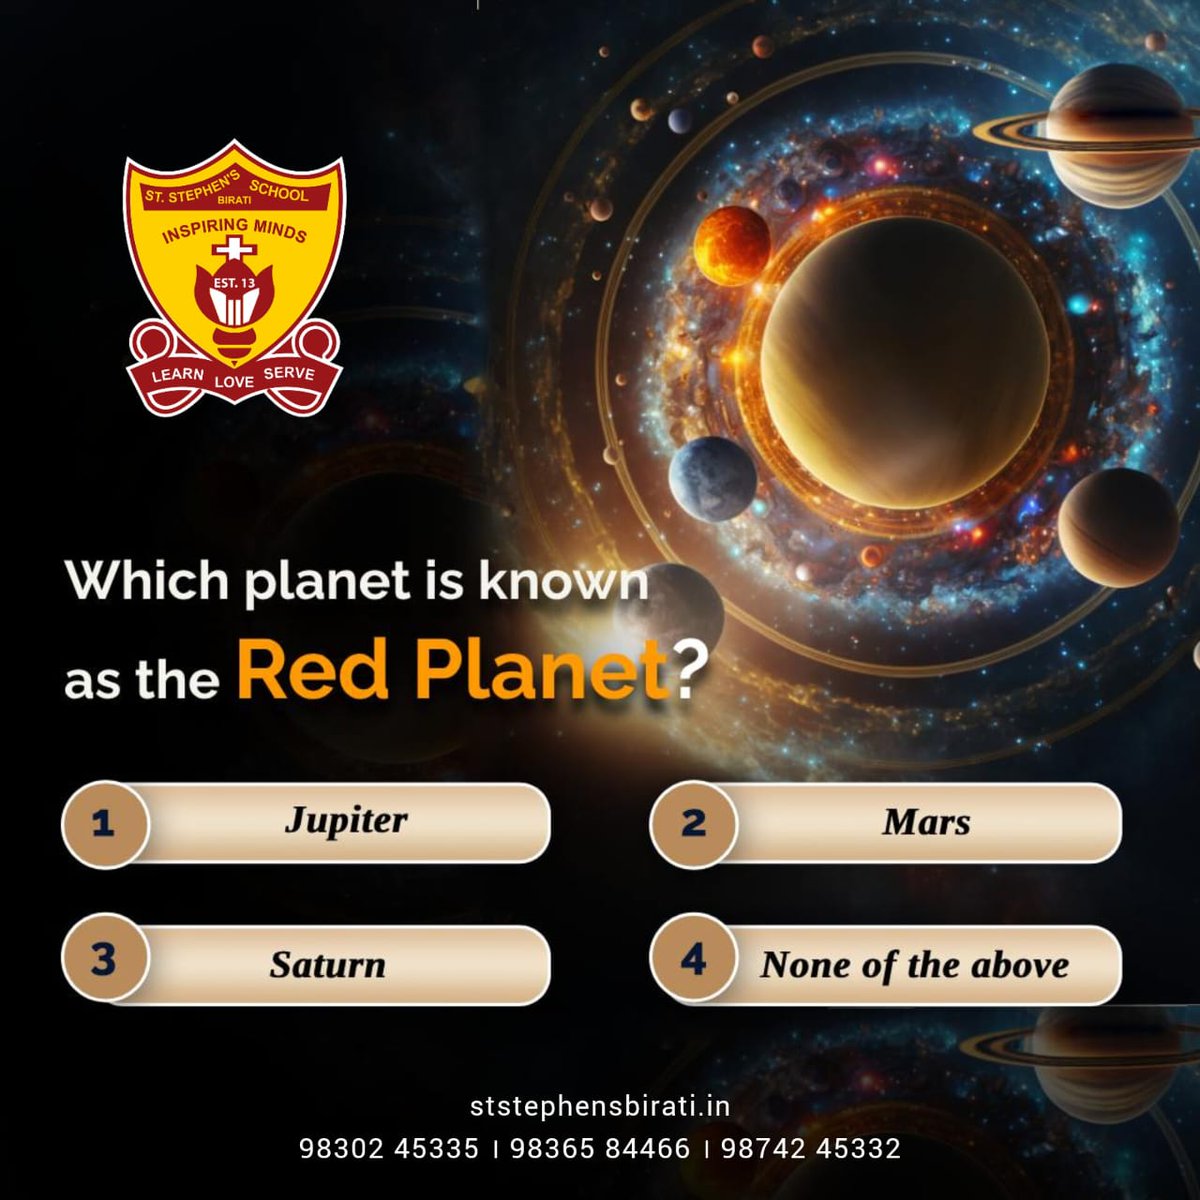 Test your knowledge! 📚 Share your answers in the comments below. 🌐 ststephensbirati.in #StStephensSchoolBirati #StStephensSchool #ICSESchool #digitalschool #schoolquiz #geography #geographyquiz #planet #redplanet